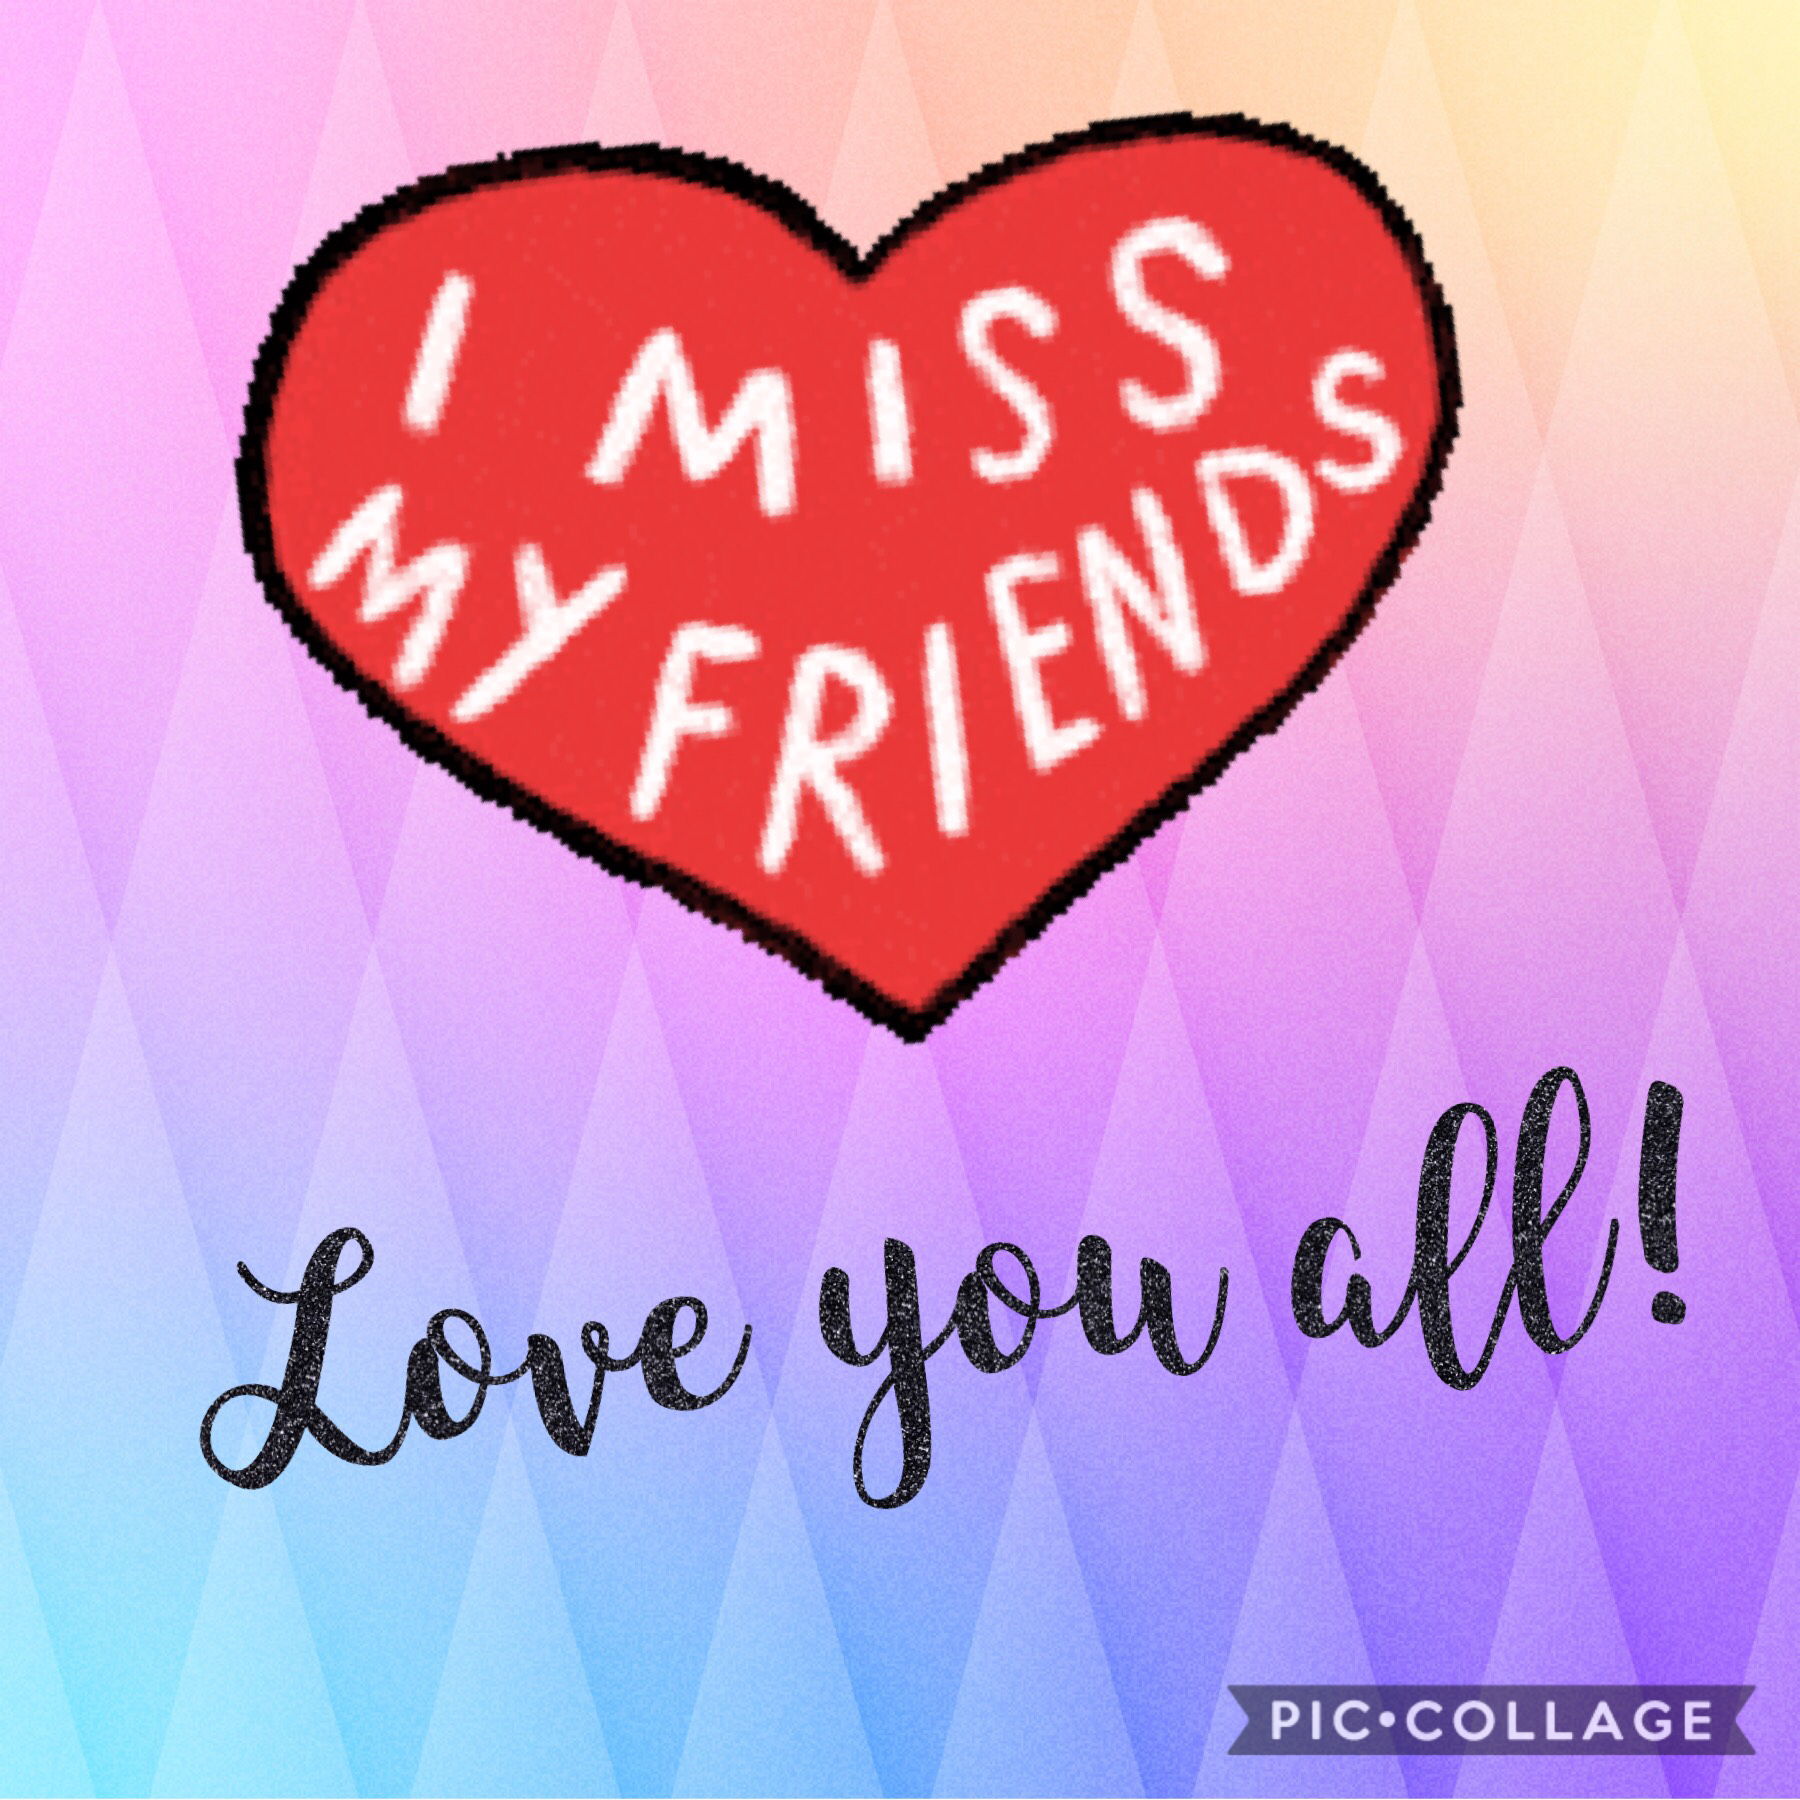 Love you all! 😘😍🥰. Miss you friends!!! ❤️🧡💛💚💙💜